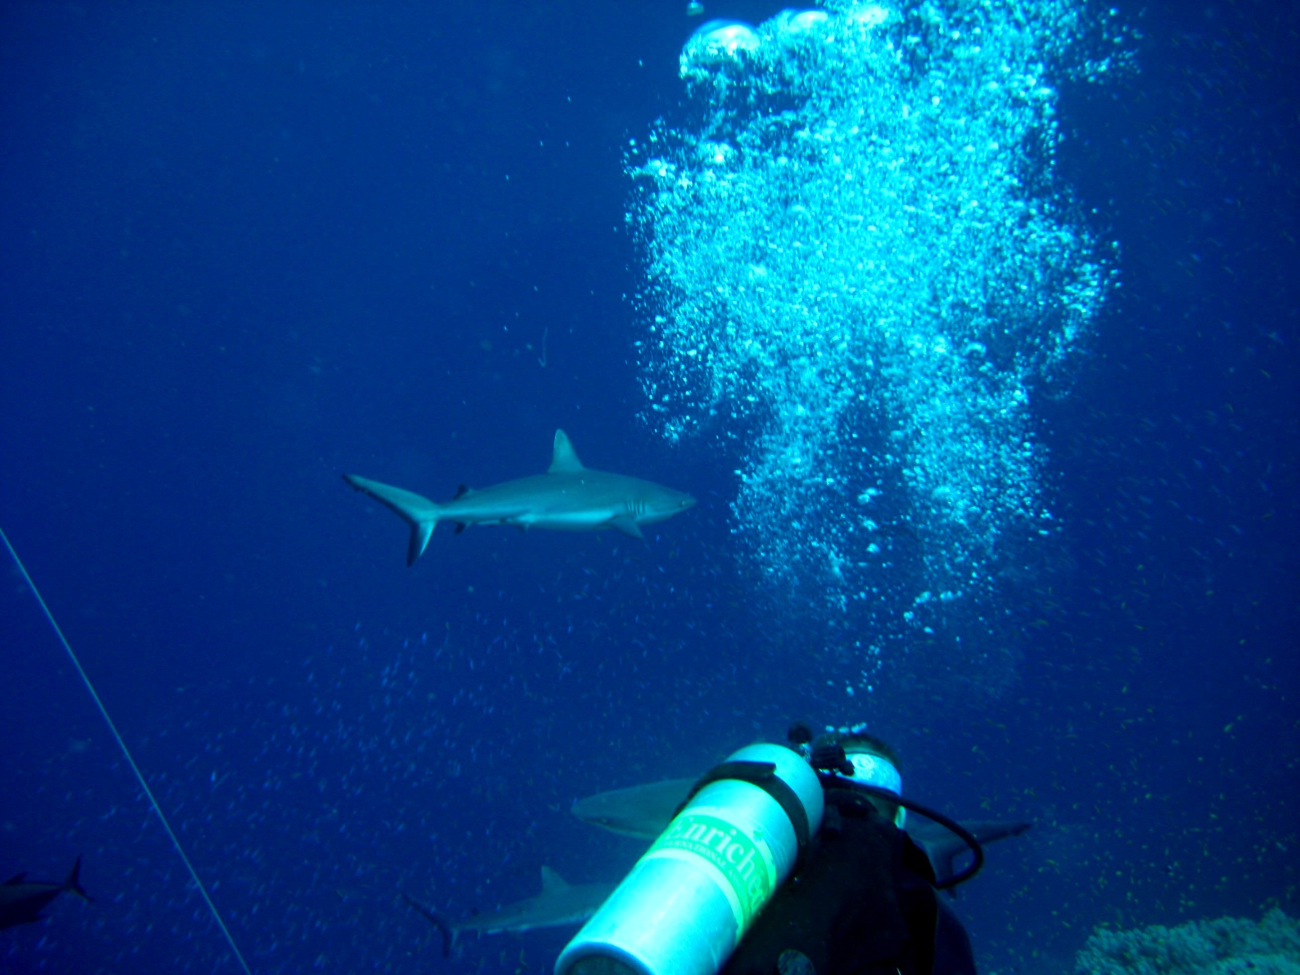 Scuba diver with gray reef shark in background